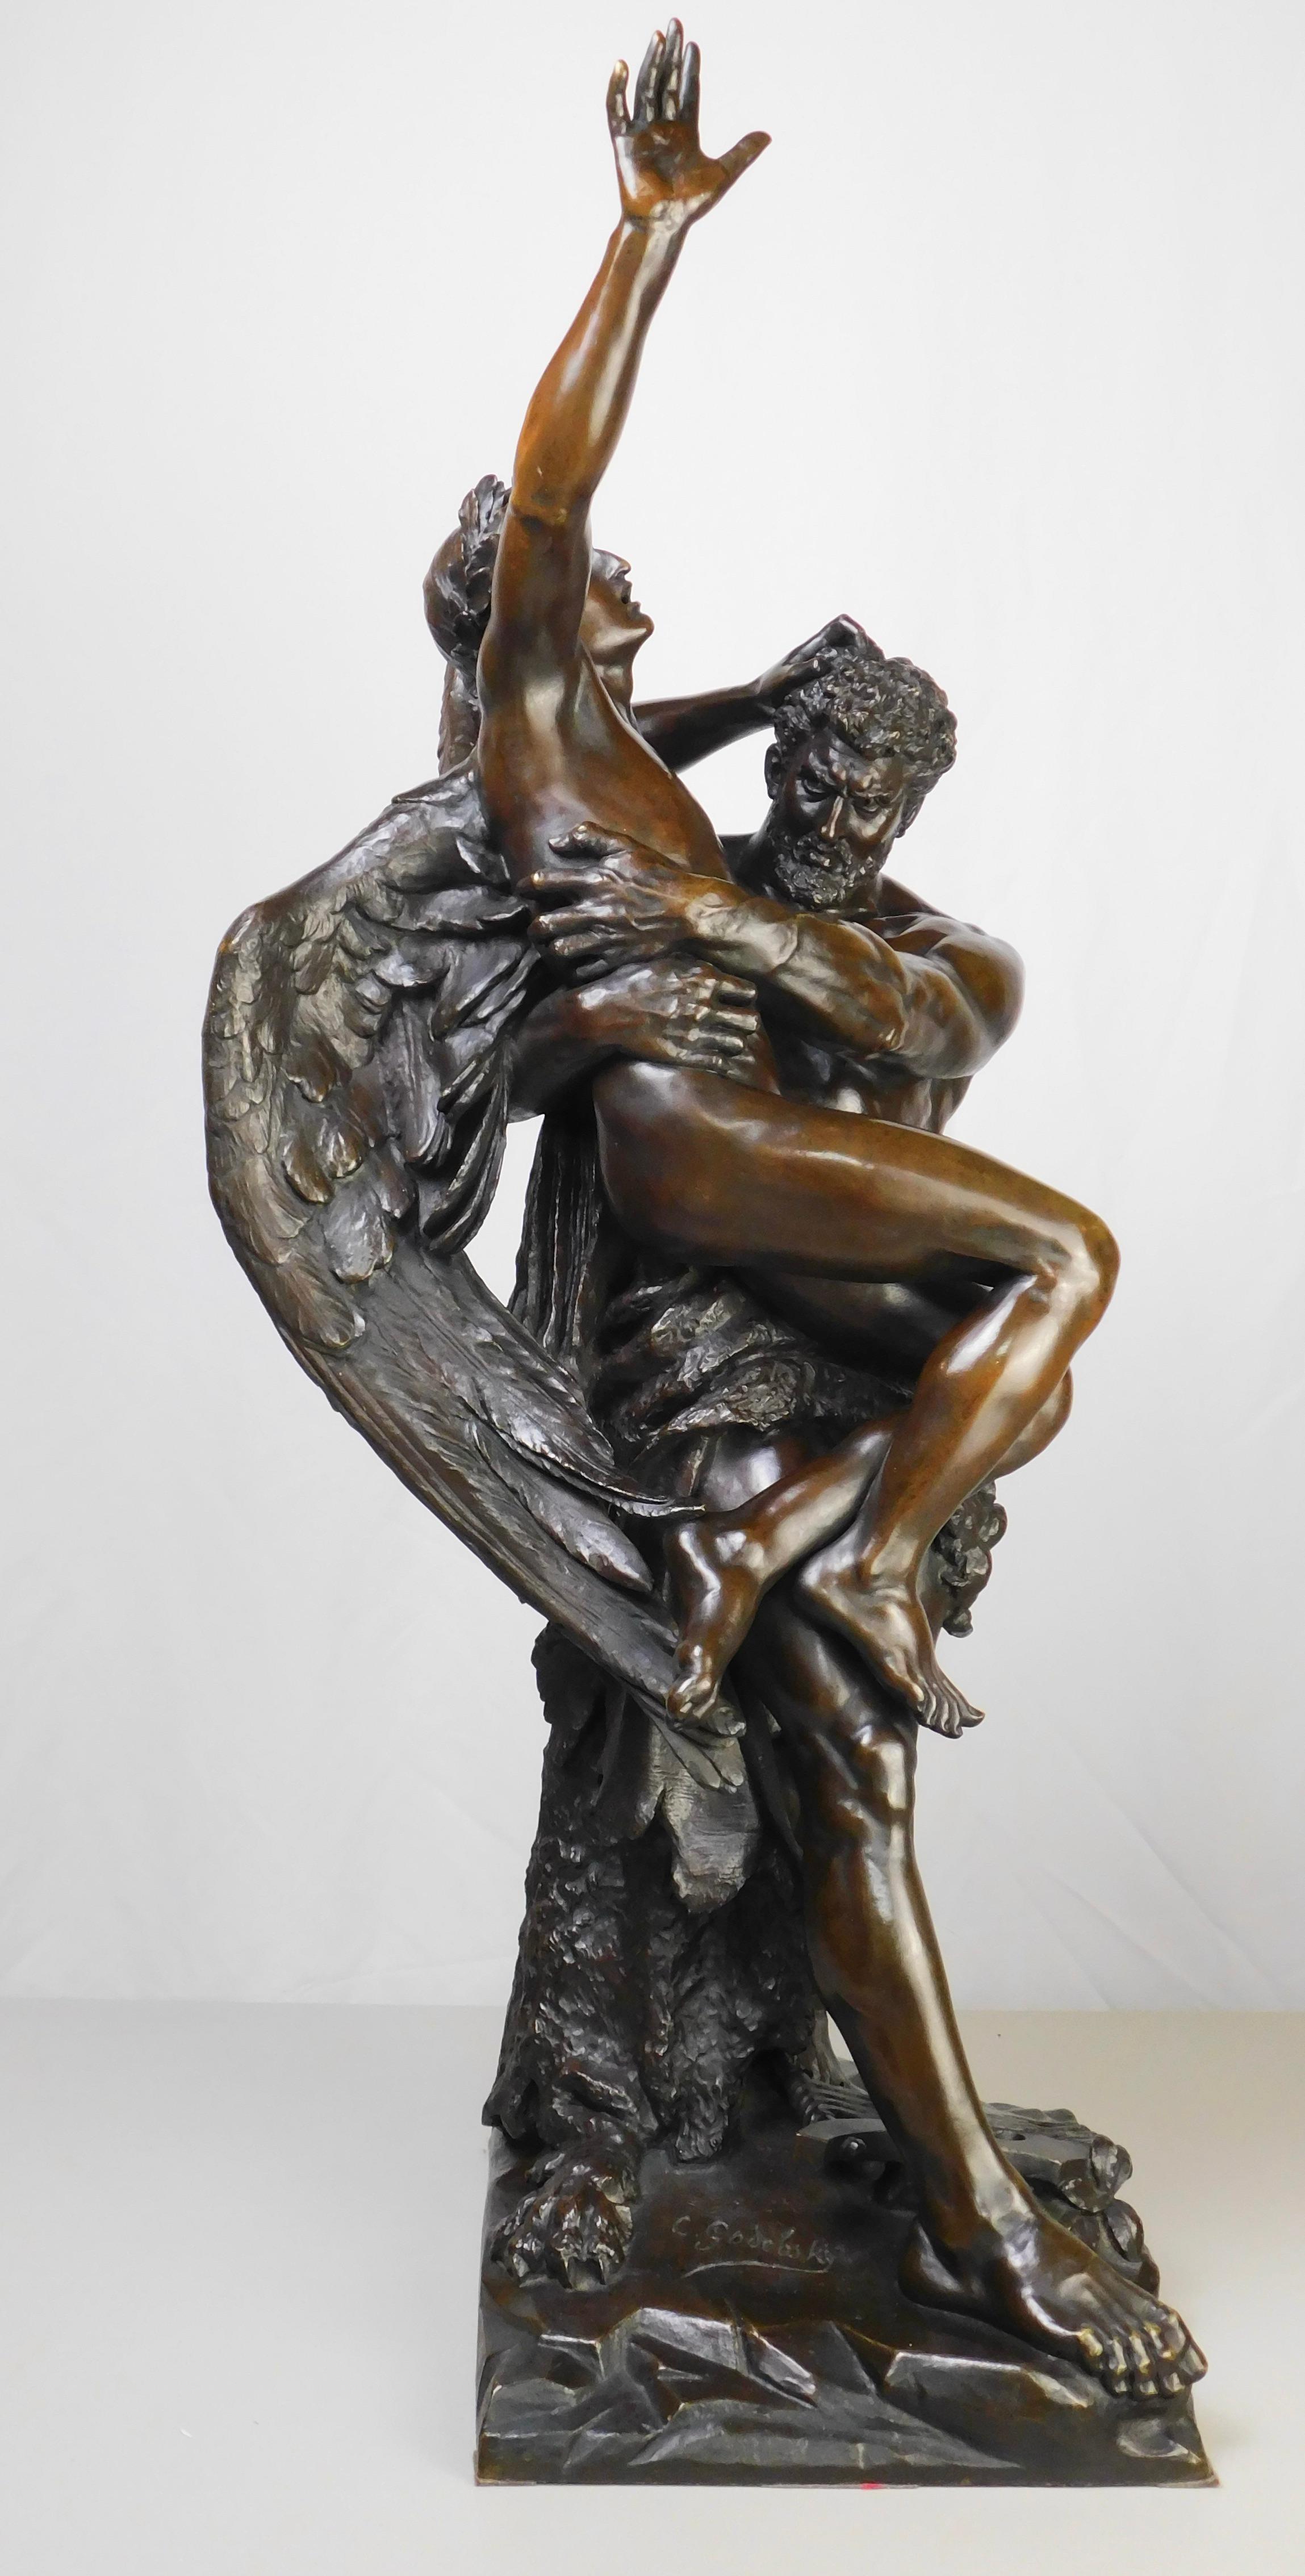 Romantic Antique Bronze Sculpture Genius and Brute Force by Cyprien Godebski For Sale